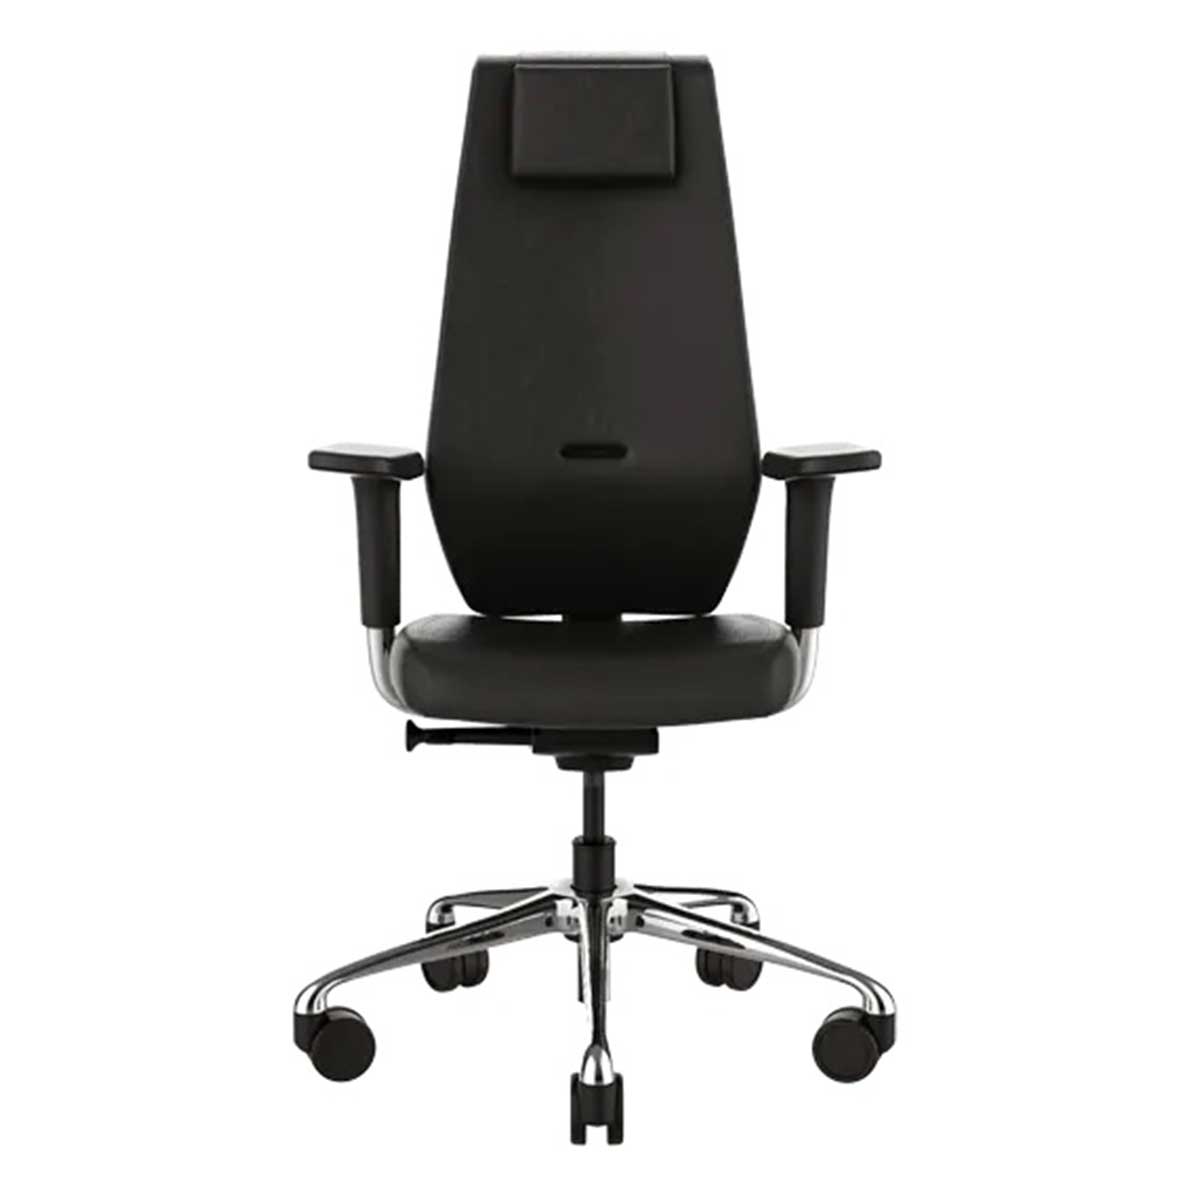 Mesh Executive Chair Manufacturers, Suppliers in Noida Sector 76